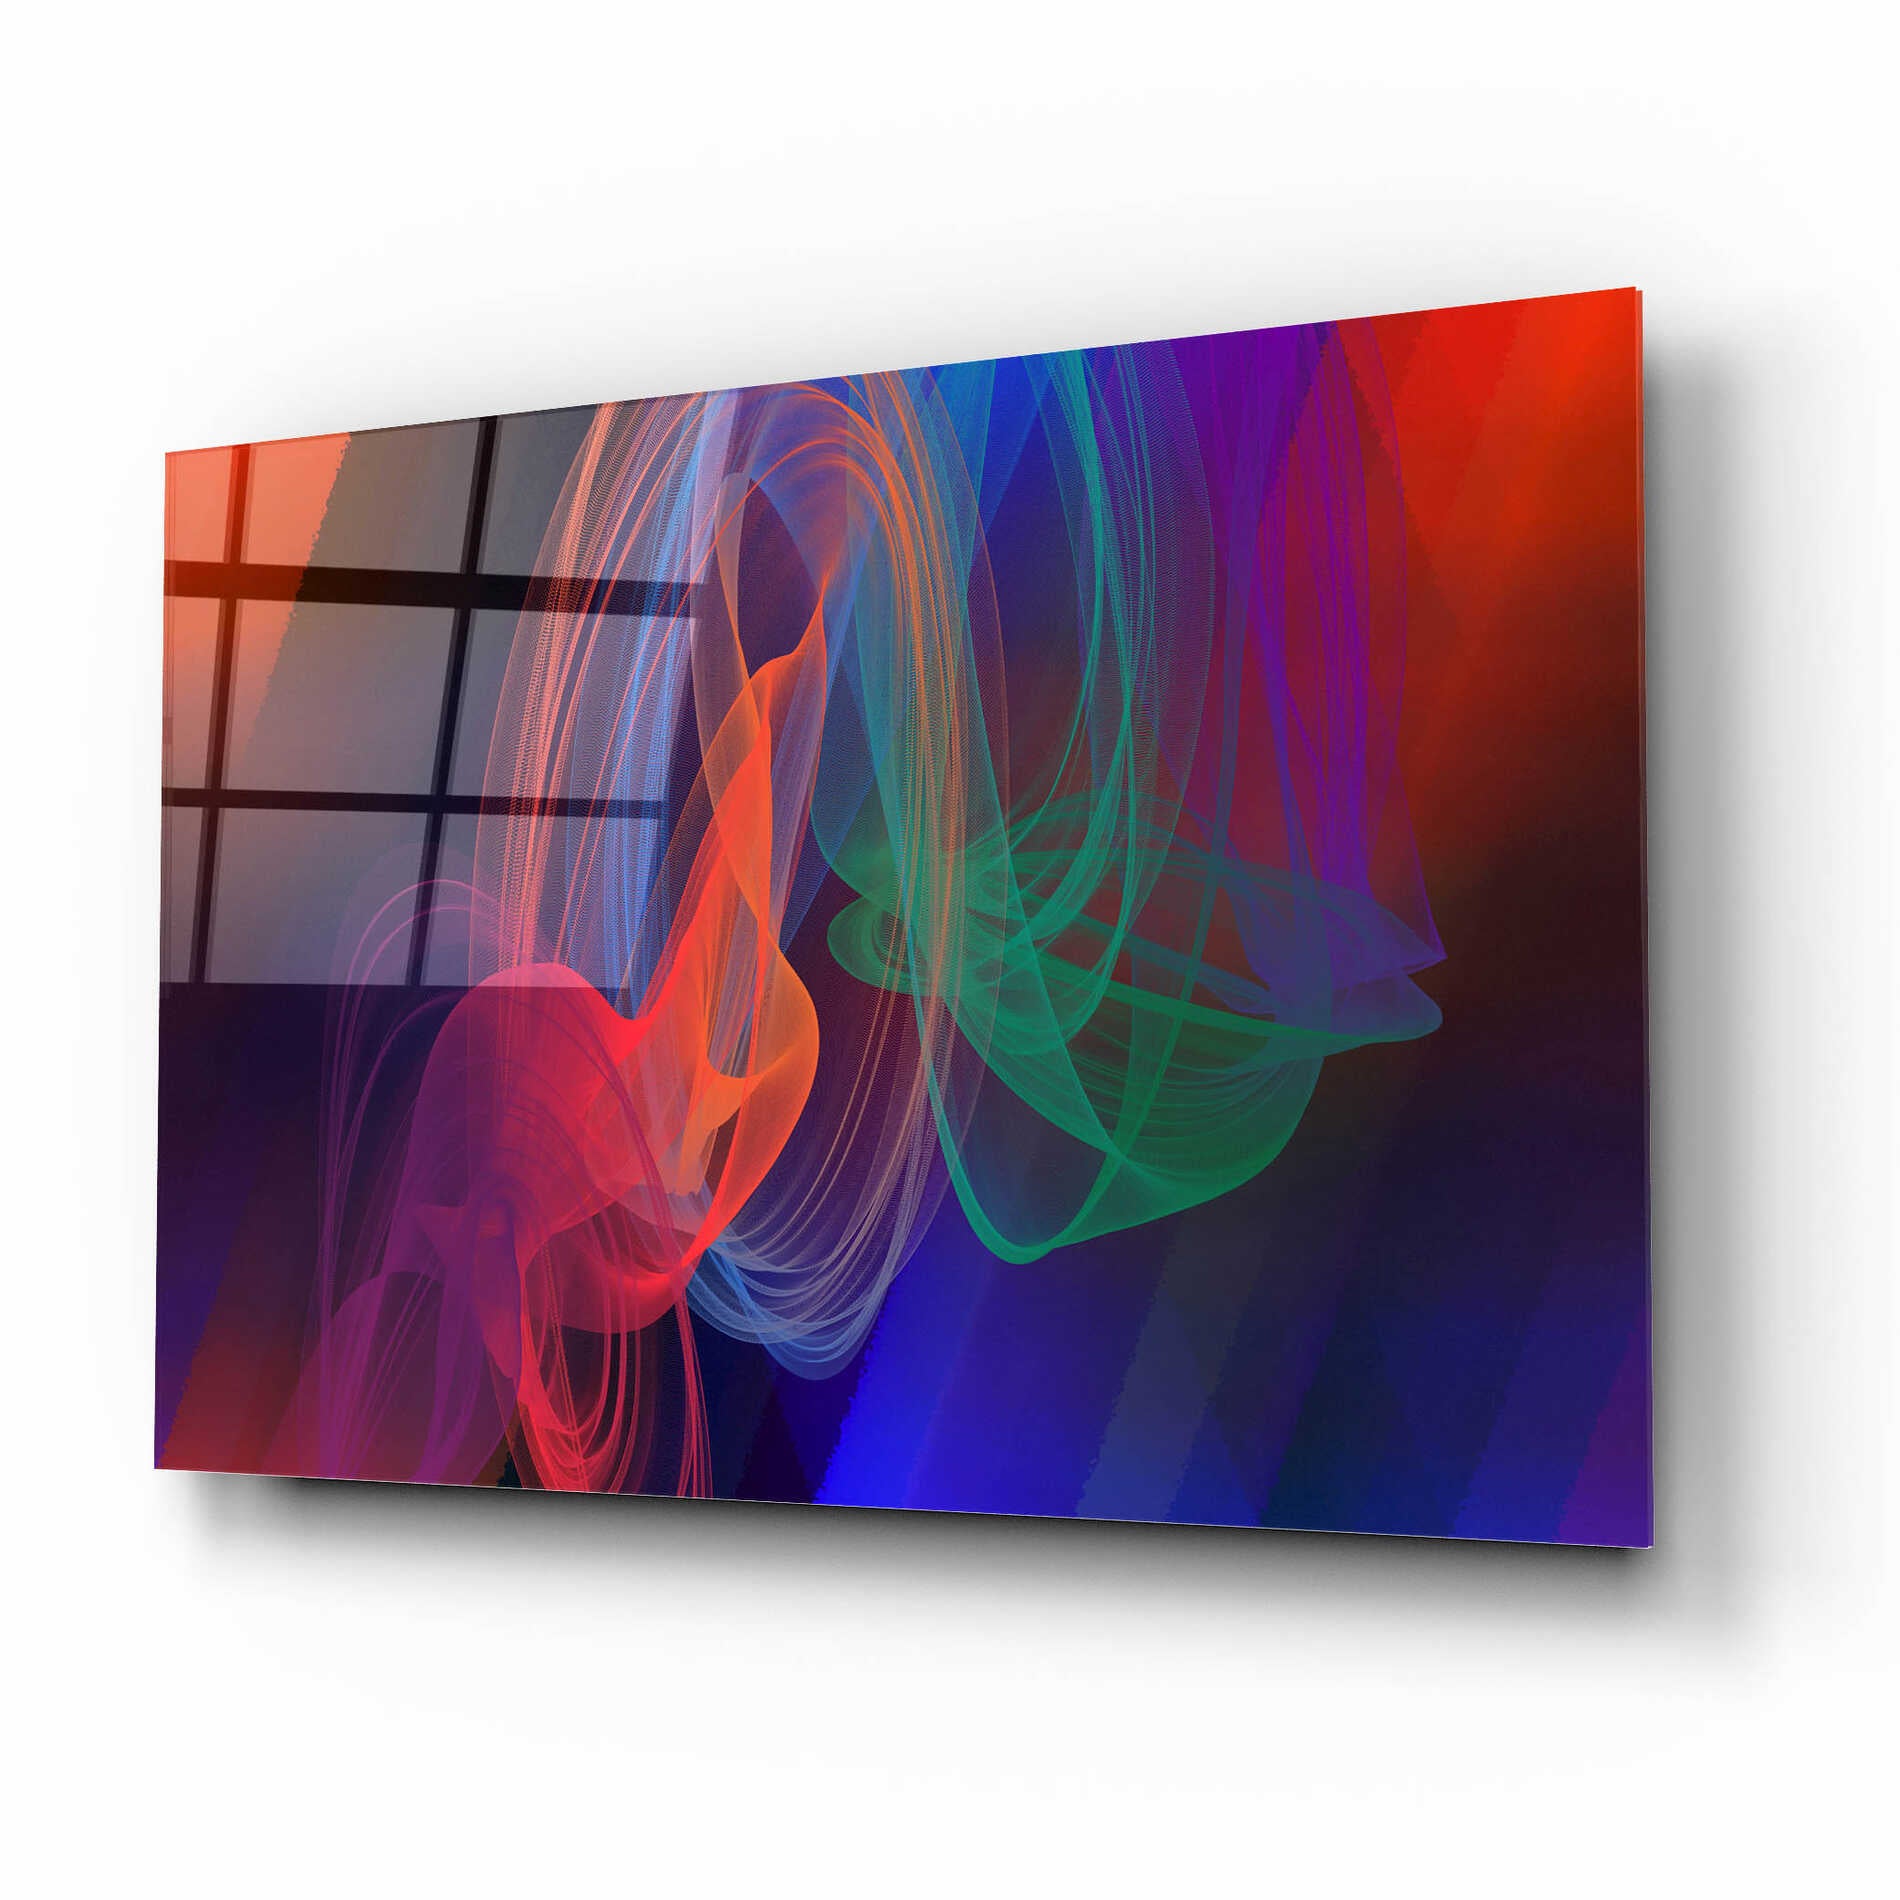 Epic Art 'Inverted Color In The Lines 11' by Irena Orlov Acrylic Glass Wall Art,16x12